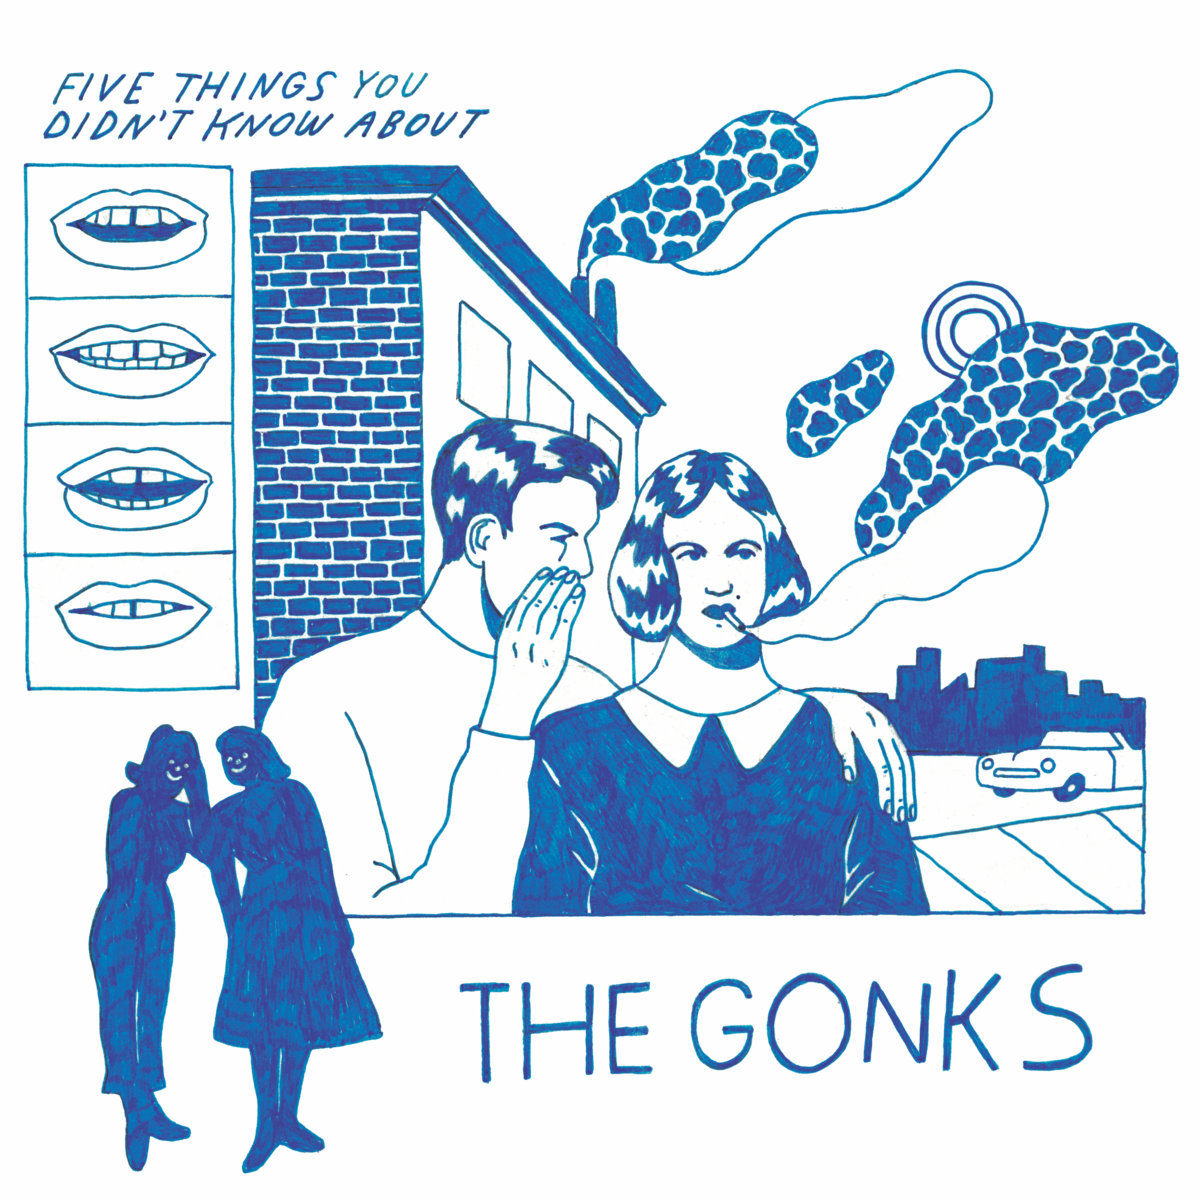 The Gonks | Five Things You Didn't Know About The Gonks | 3hive.com